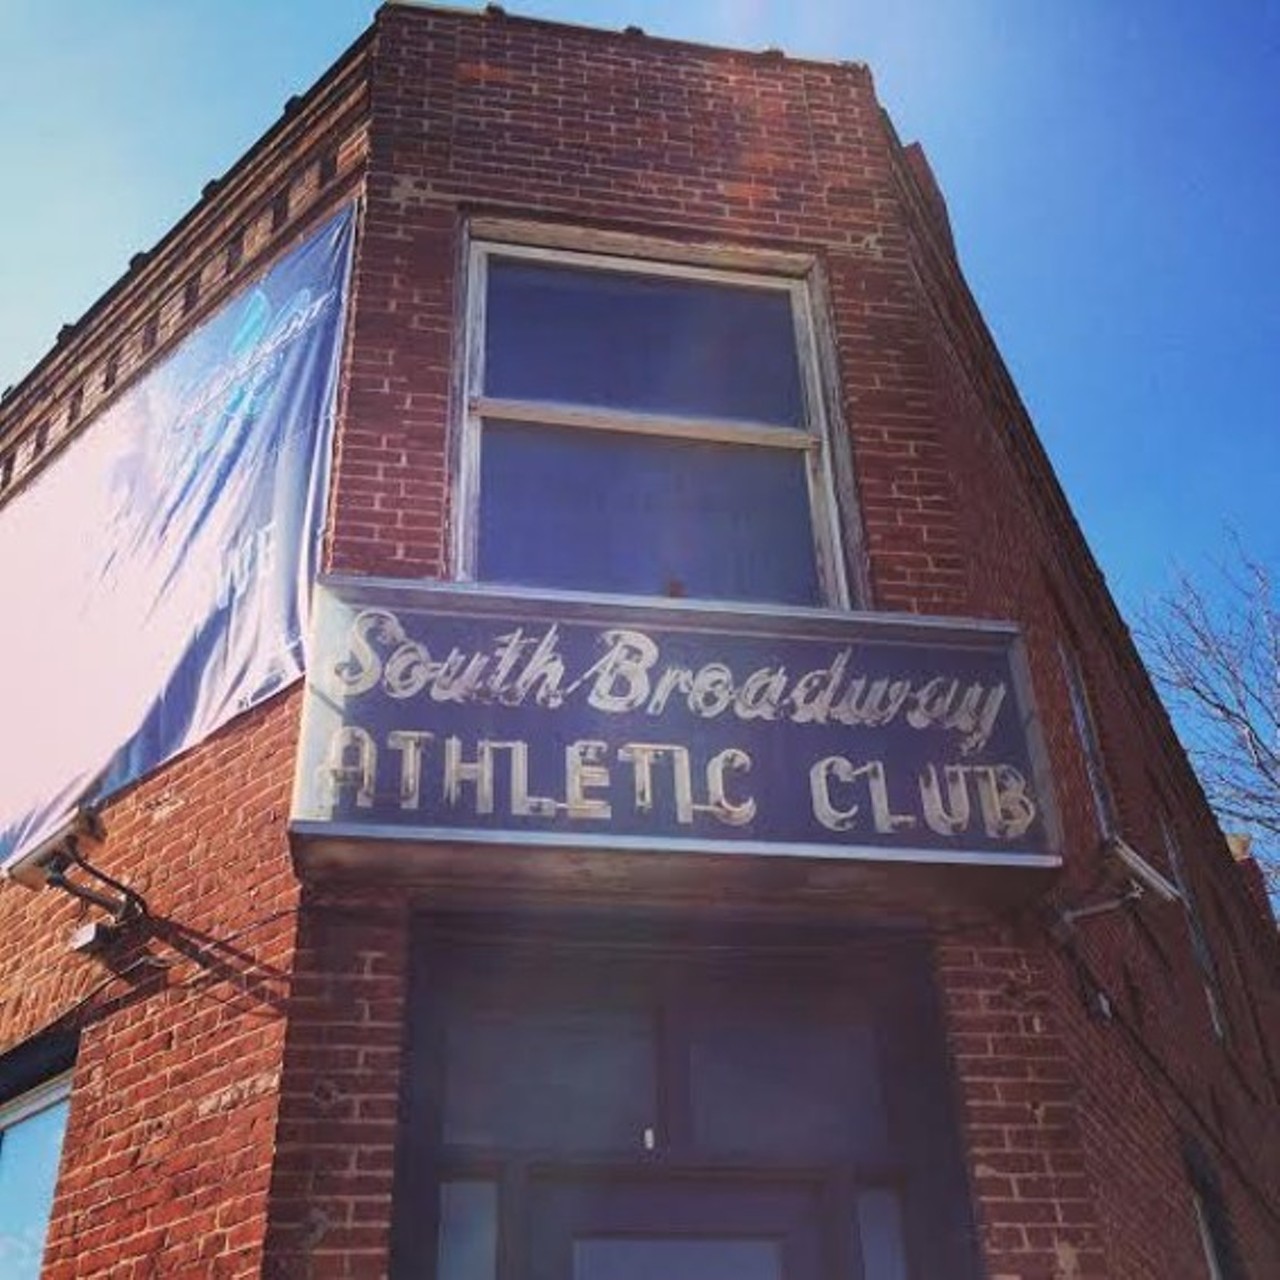 South Broadway Athletic Club
(2301 S 7th Street; 314-776-4833)
Going to watch wrestling at the South Broadway Athletic Club is a south city tradition. You can't really claim that you're from the south side until you've spent the night sweating and screaming in this crazy atmosphere. It goes without saying that kids love it. It's like a television show, but in real life! They also serve beer and basic mixed drinks in the back corner and they're essential to the experience.
Photo credit: Lindsay Toler